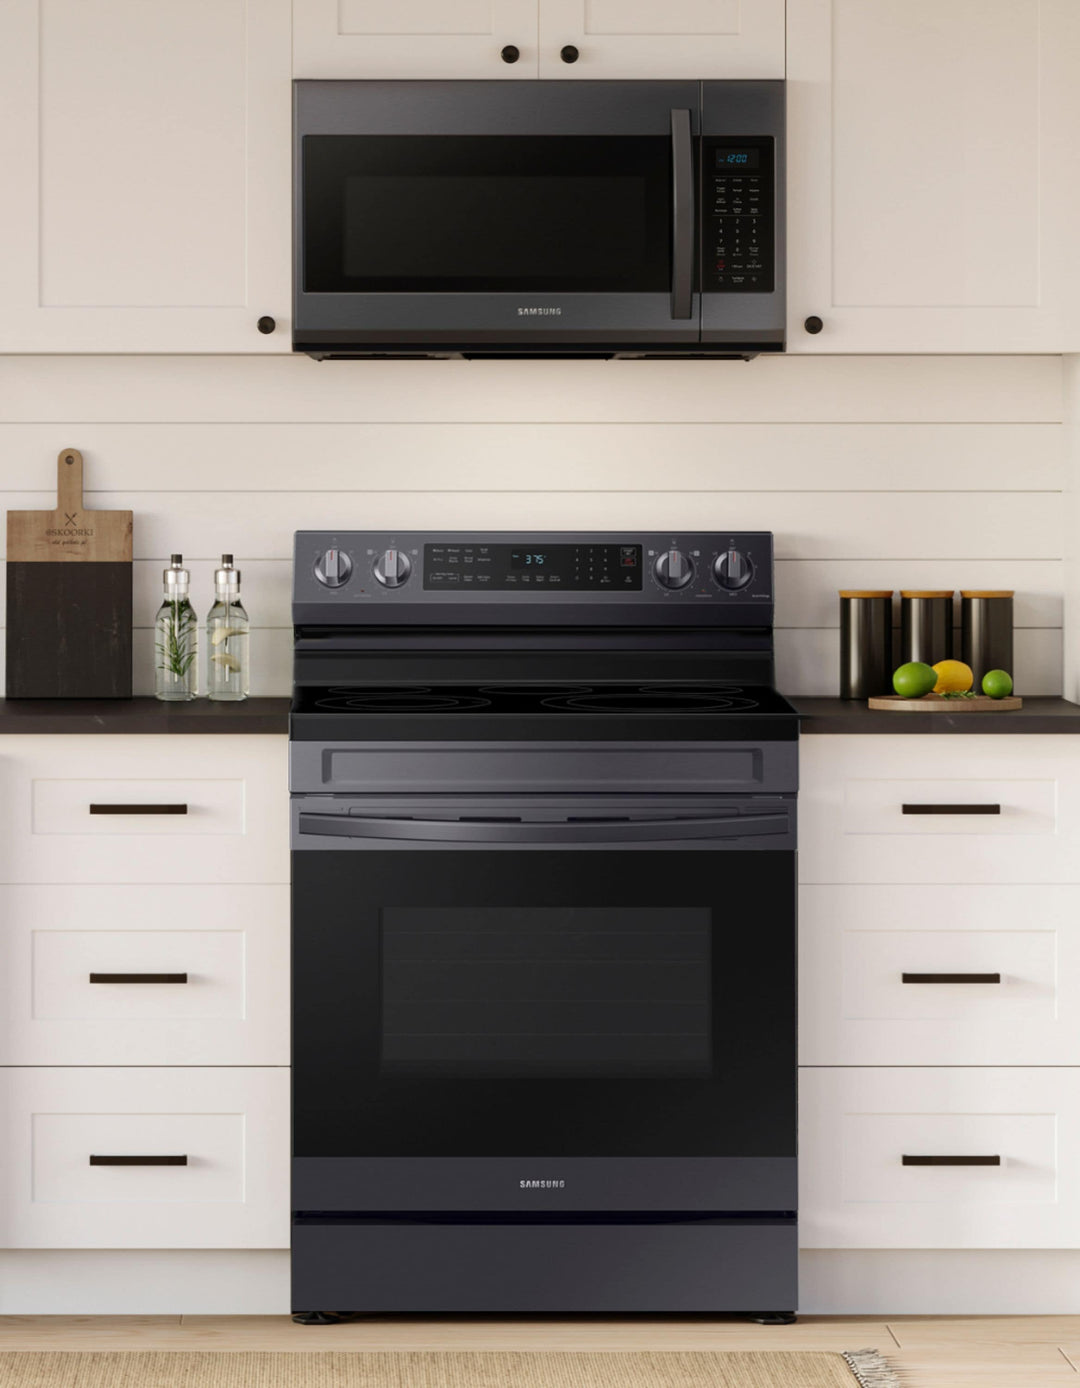 Samsung - 6.3 cu. ft. Freestanding Electric Range with WiFi, No-Preheat Air Fry & Convection - Black stainless steel_8